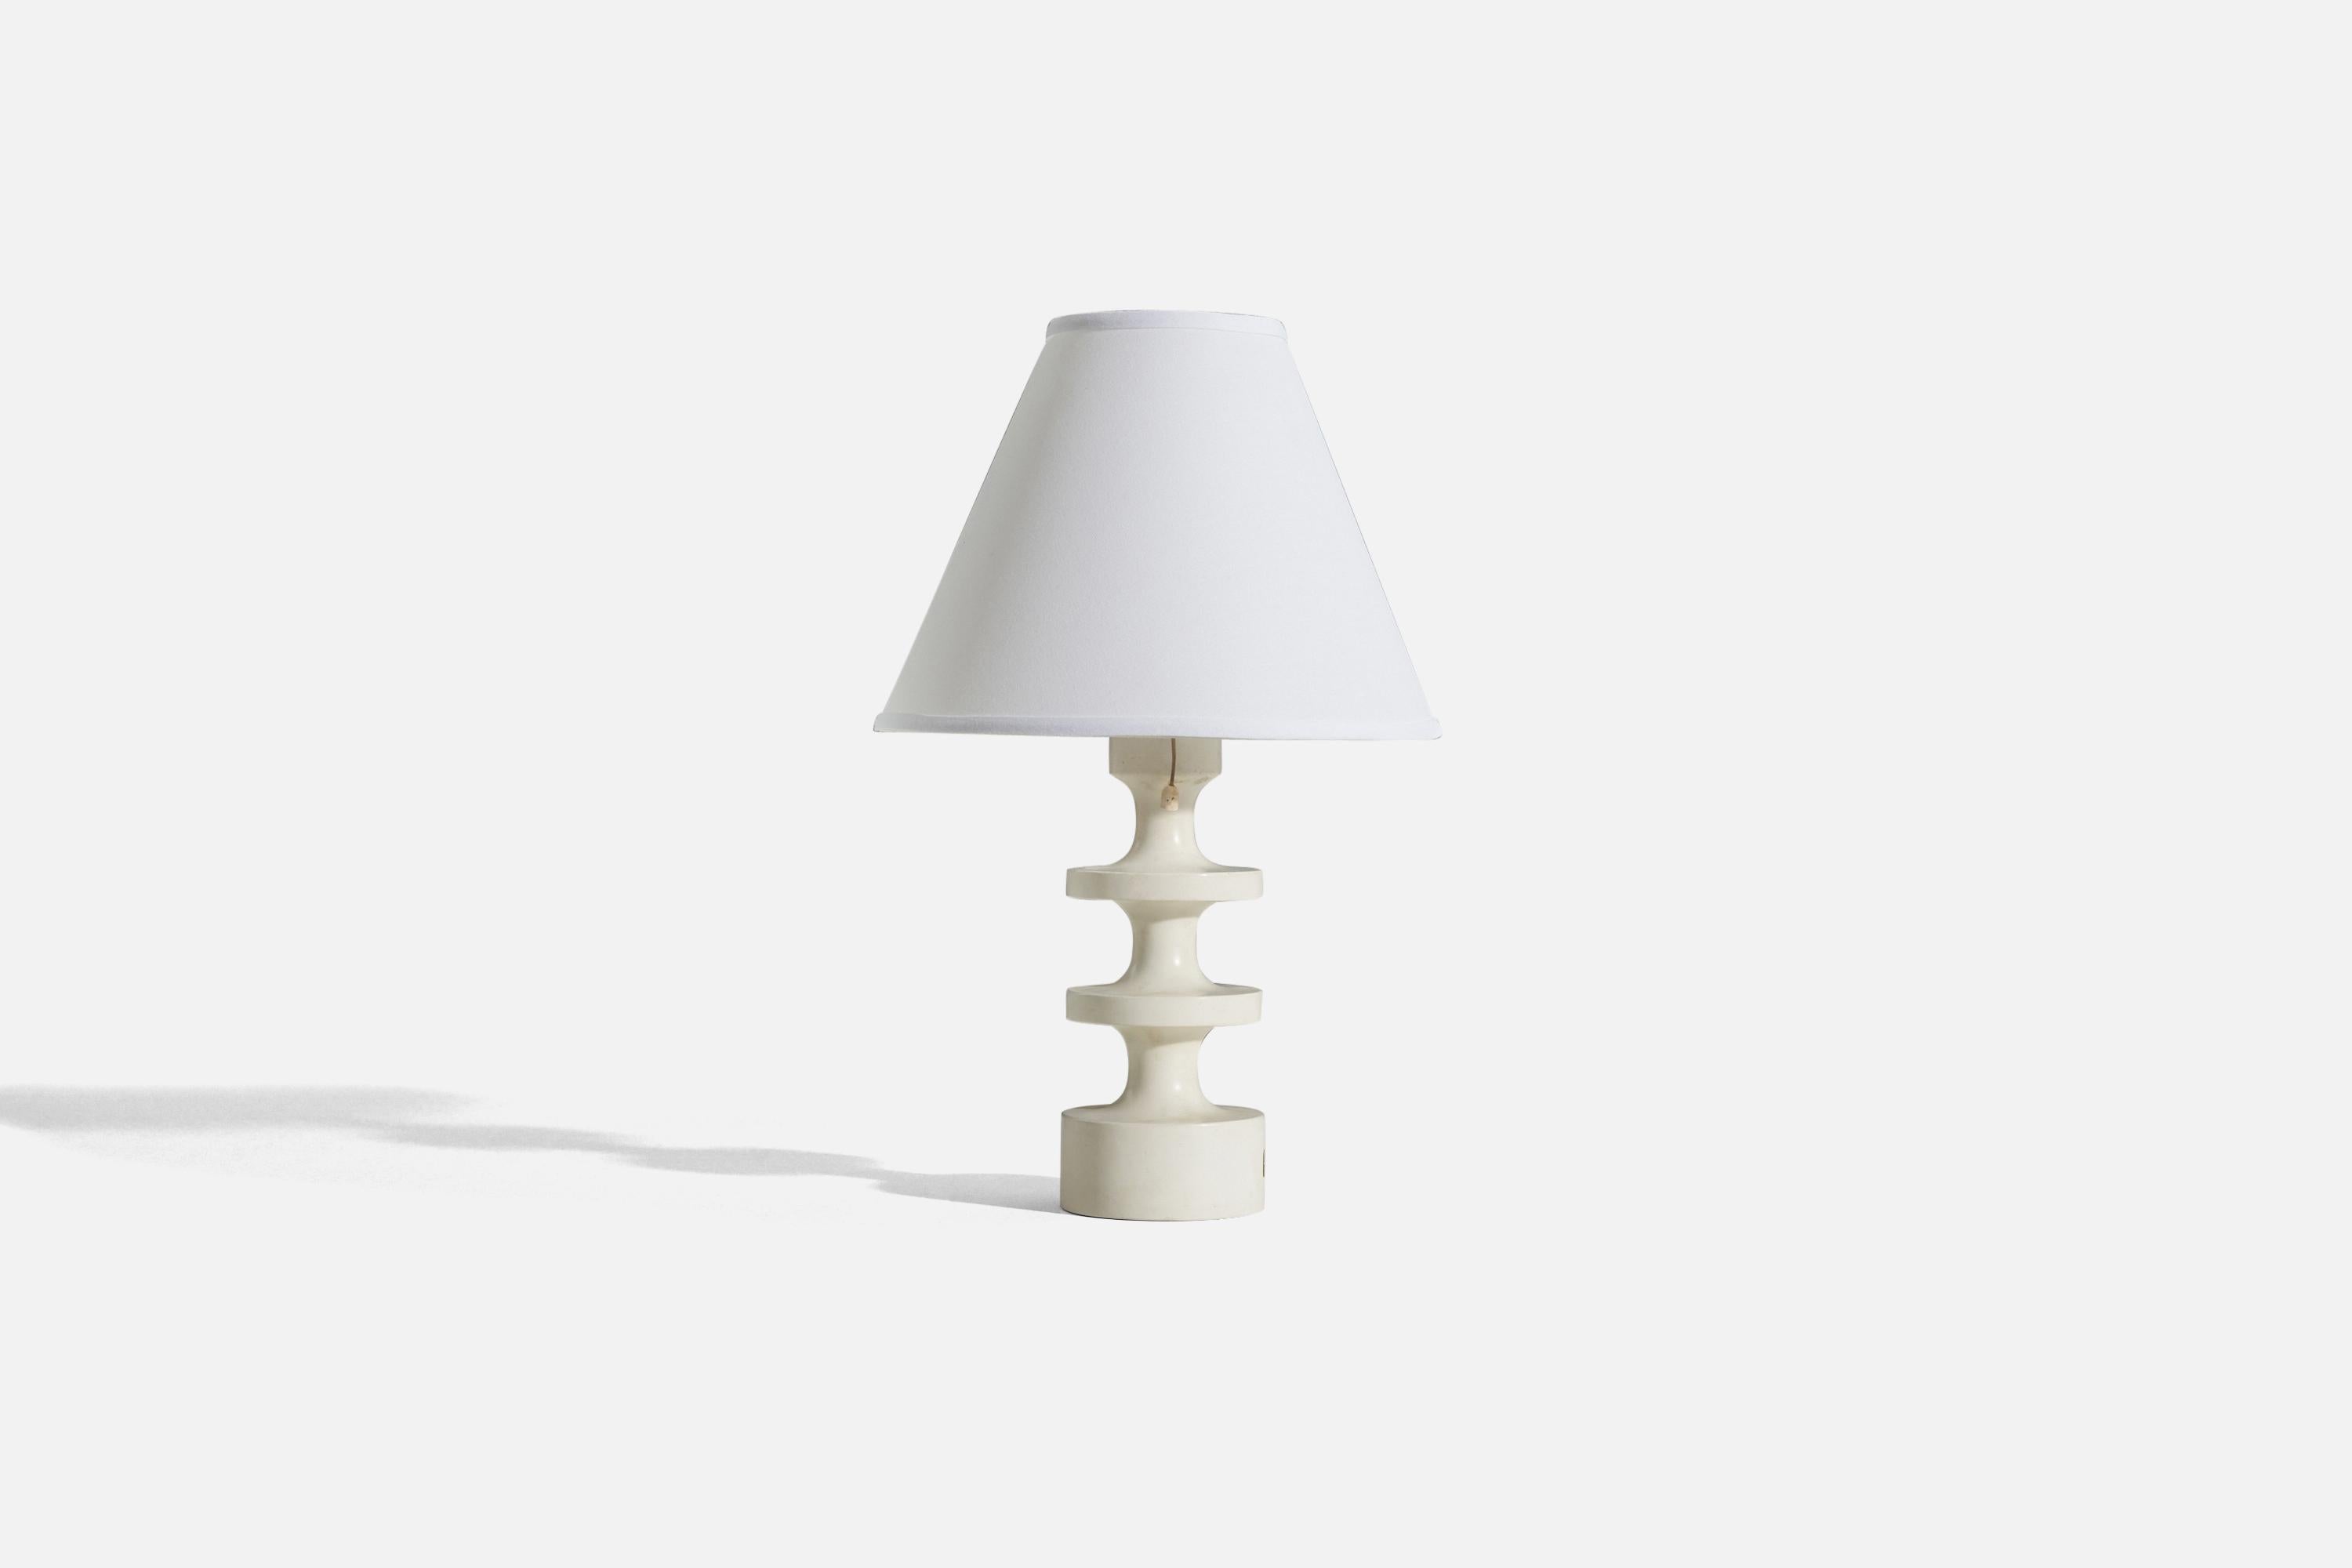 A white-painted wooden table lamp designed by Uno Kristiansson and produced by Luxus, Sweden, 1960s.

Sold without lampshade. 
Dimensions of Lamp (inches) : 11.875 x 3.625 x 3.625 (H x W x D)
Dimensions of Shade (inches) : 4 x 10 x 8 (T x B x